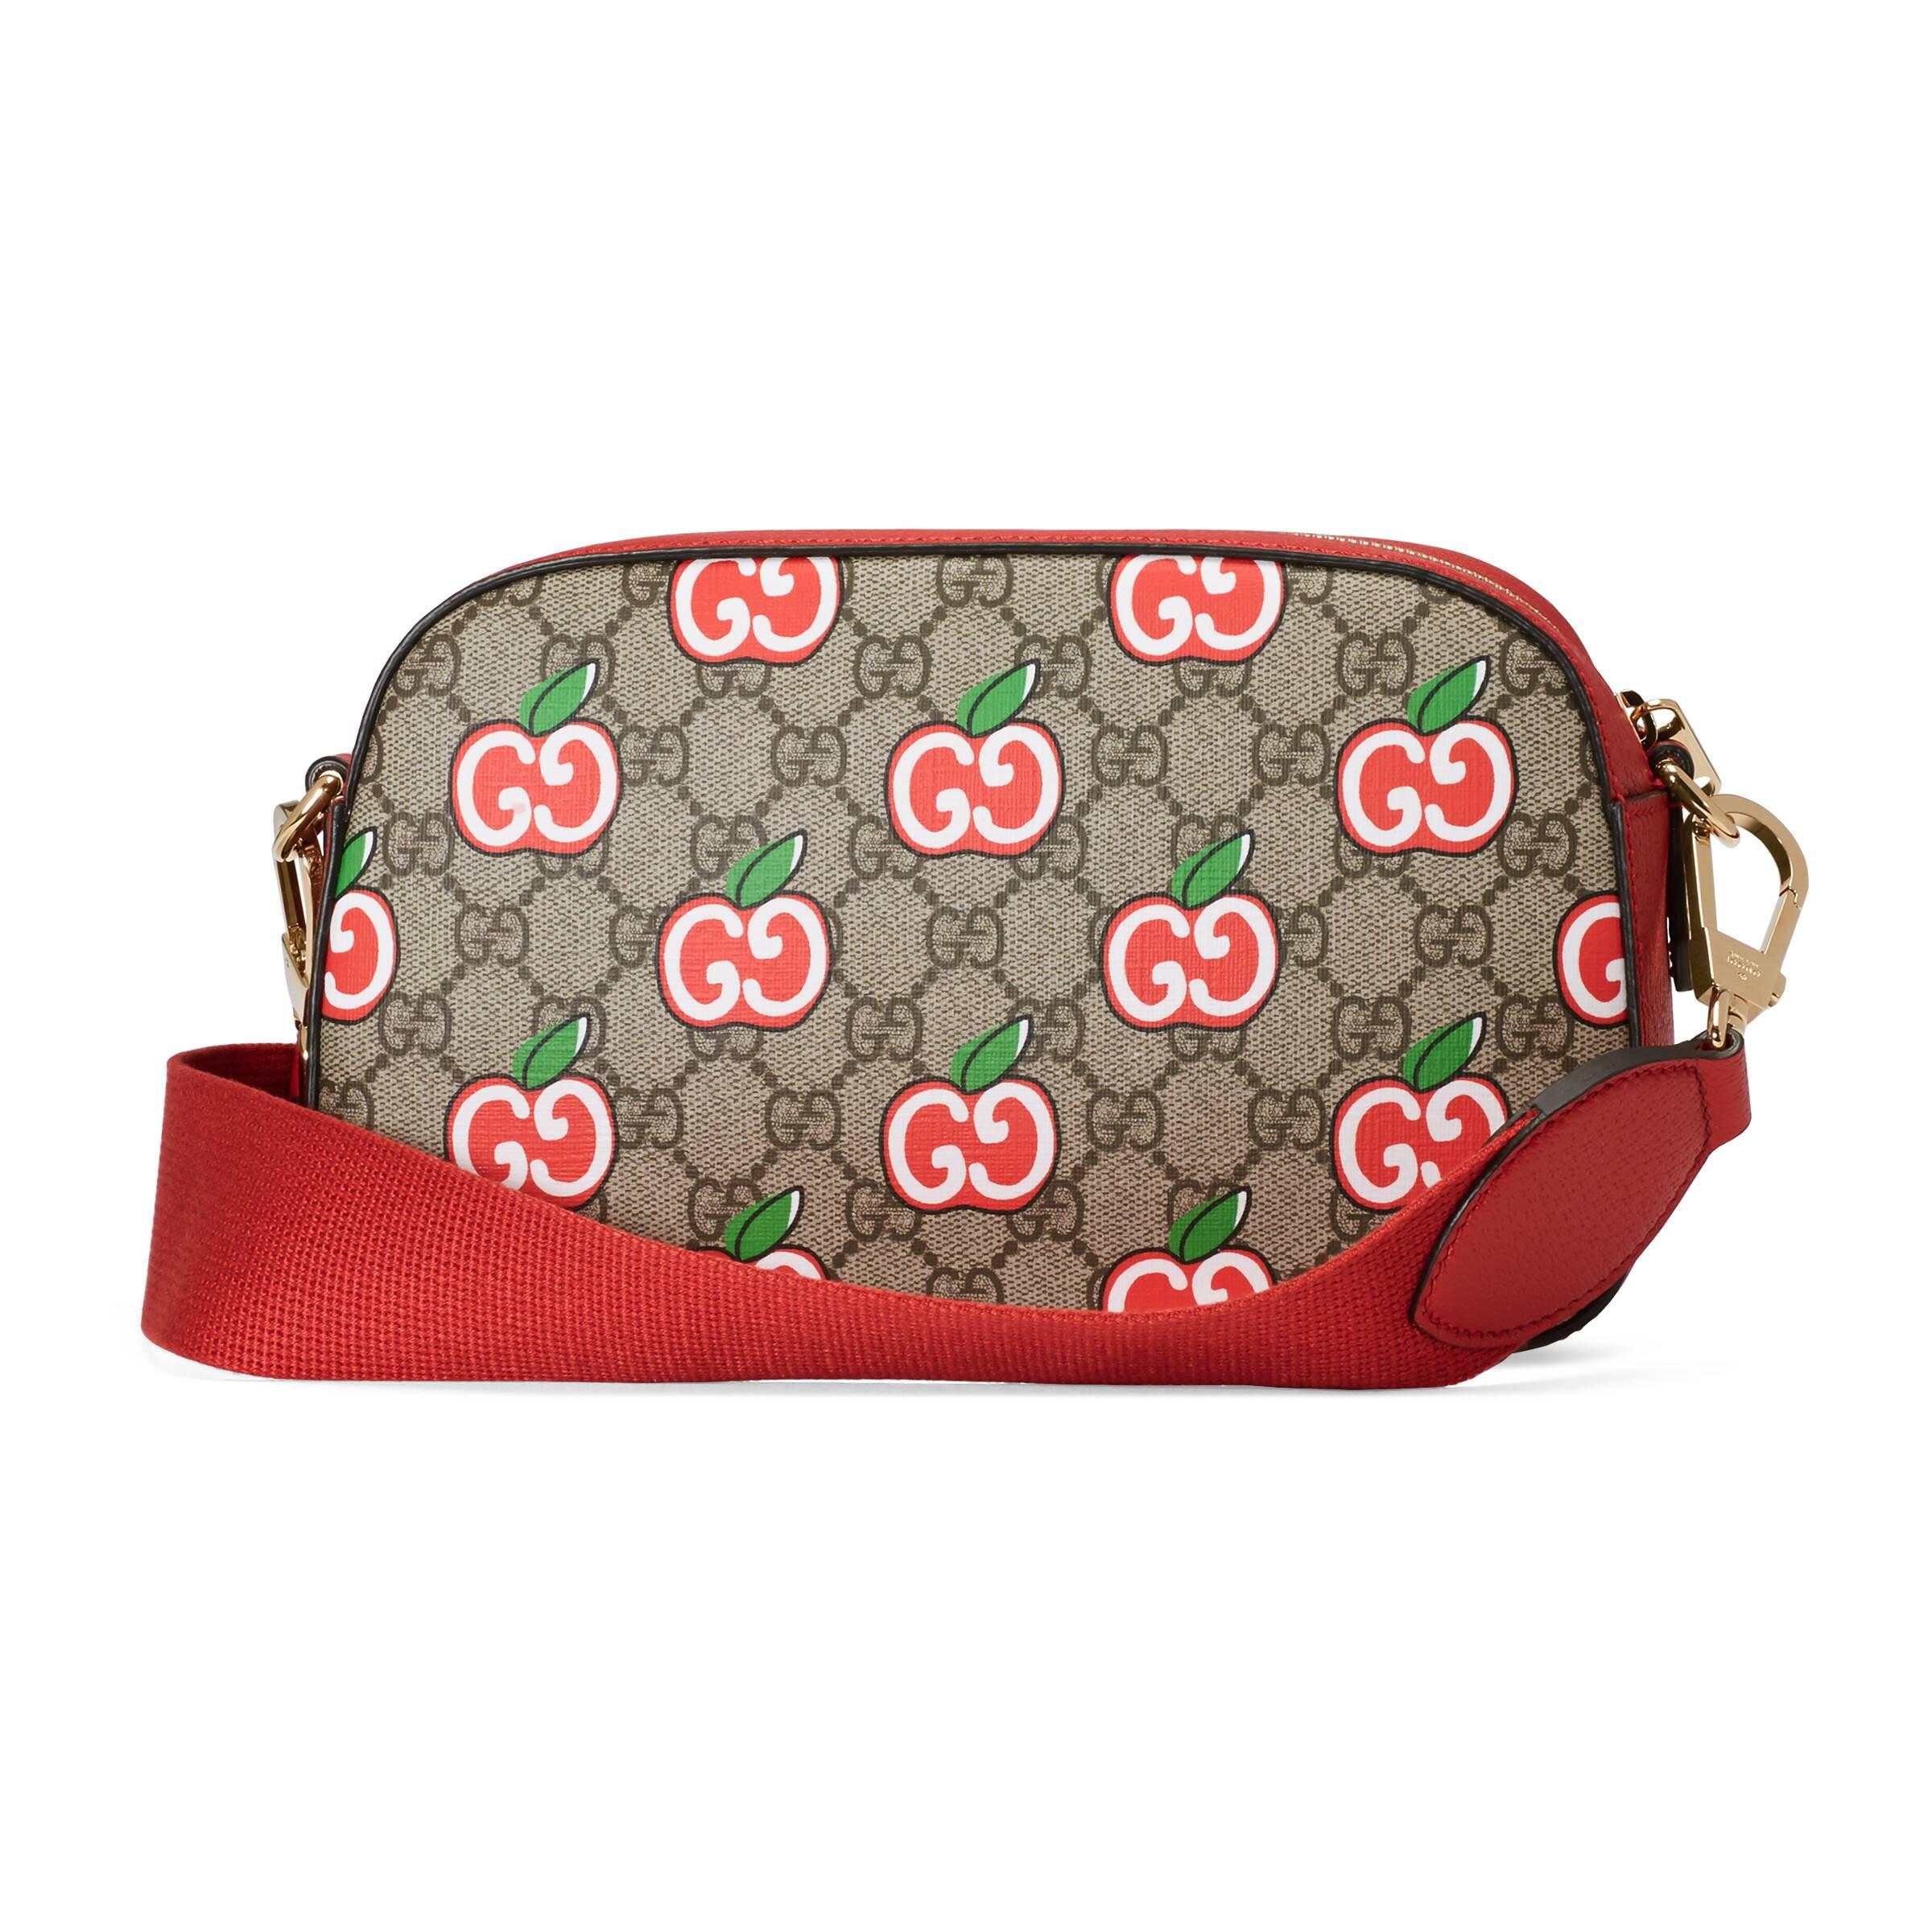 Sacoche Gucci Pomme Vinted | pamso.pl